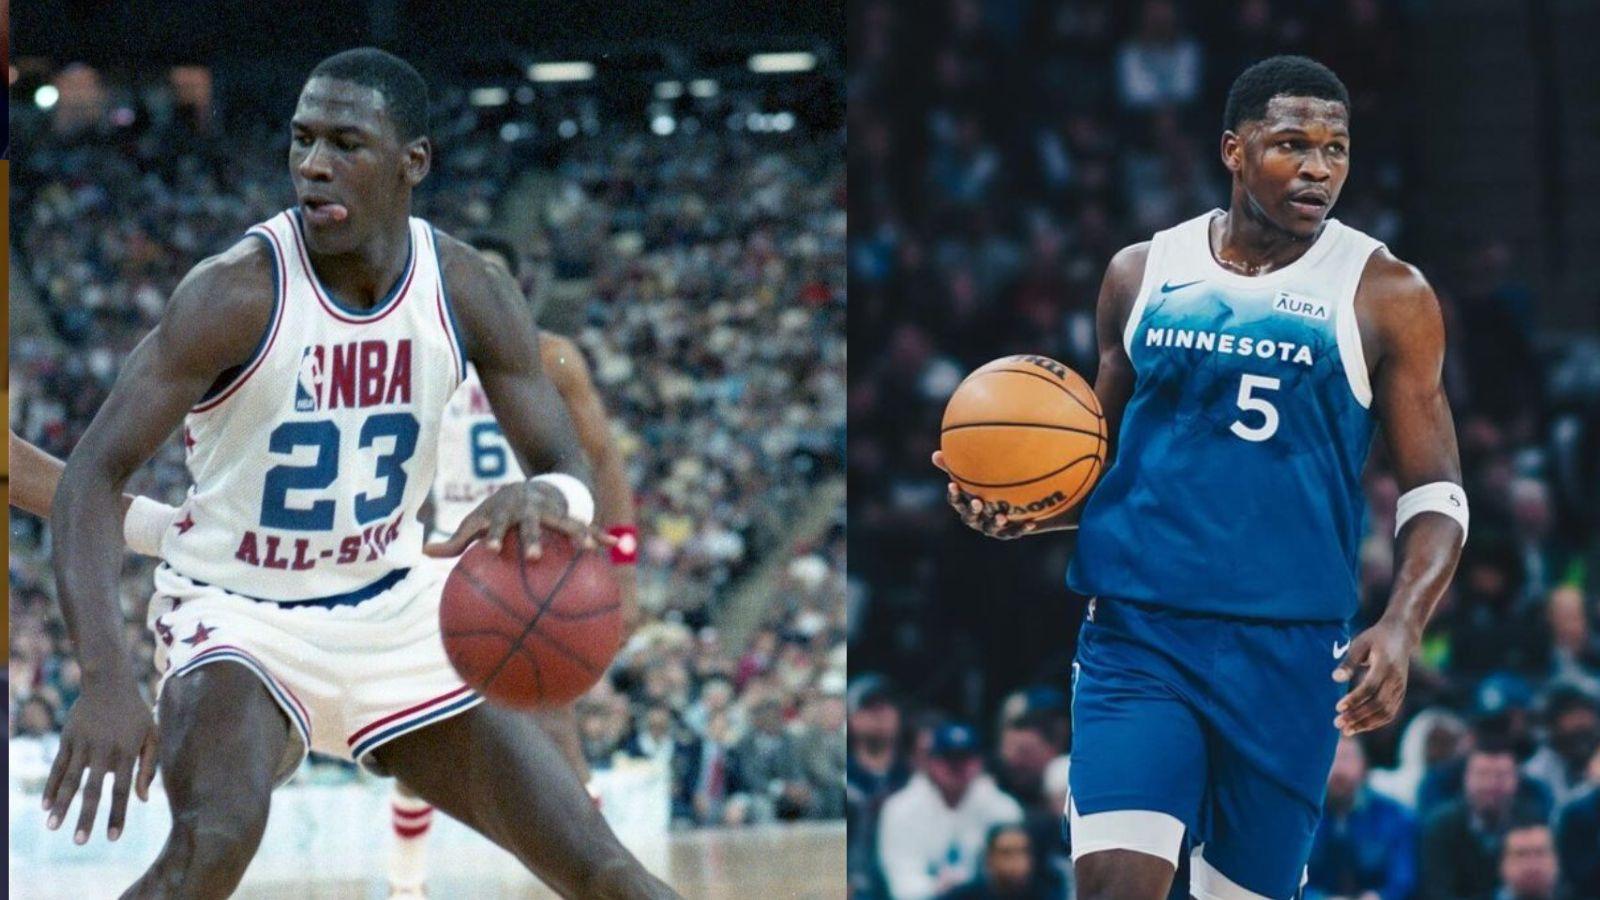 Michael Jordan as an NBA All-Star in 1985 (left) and Anthony Edwards as a member of the Minnesota Timberwolves (right).